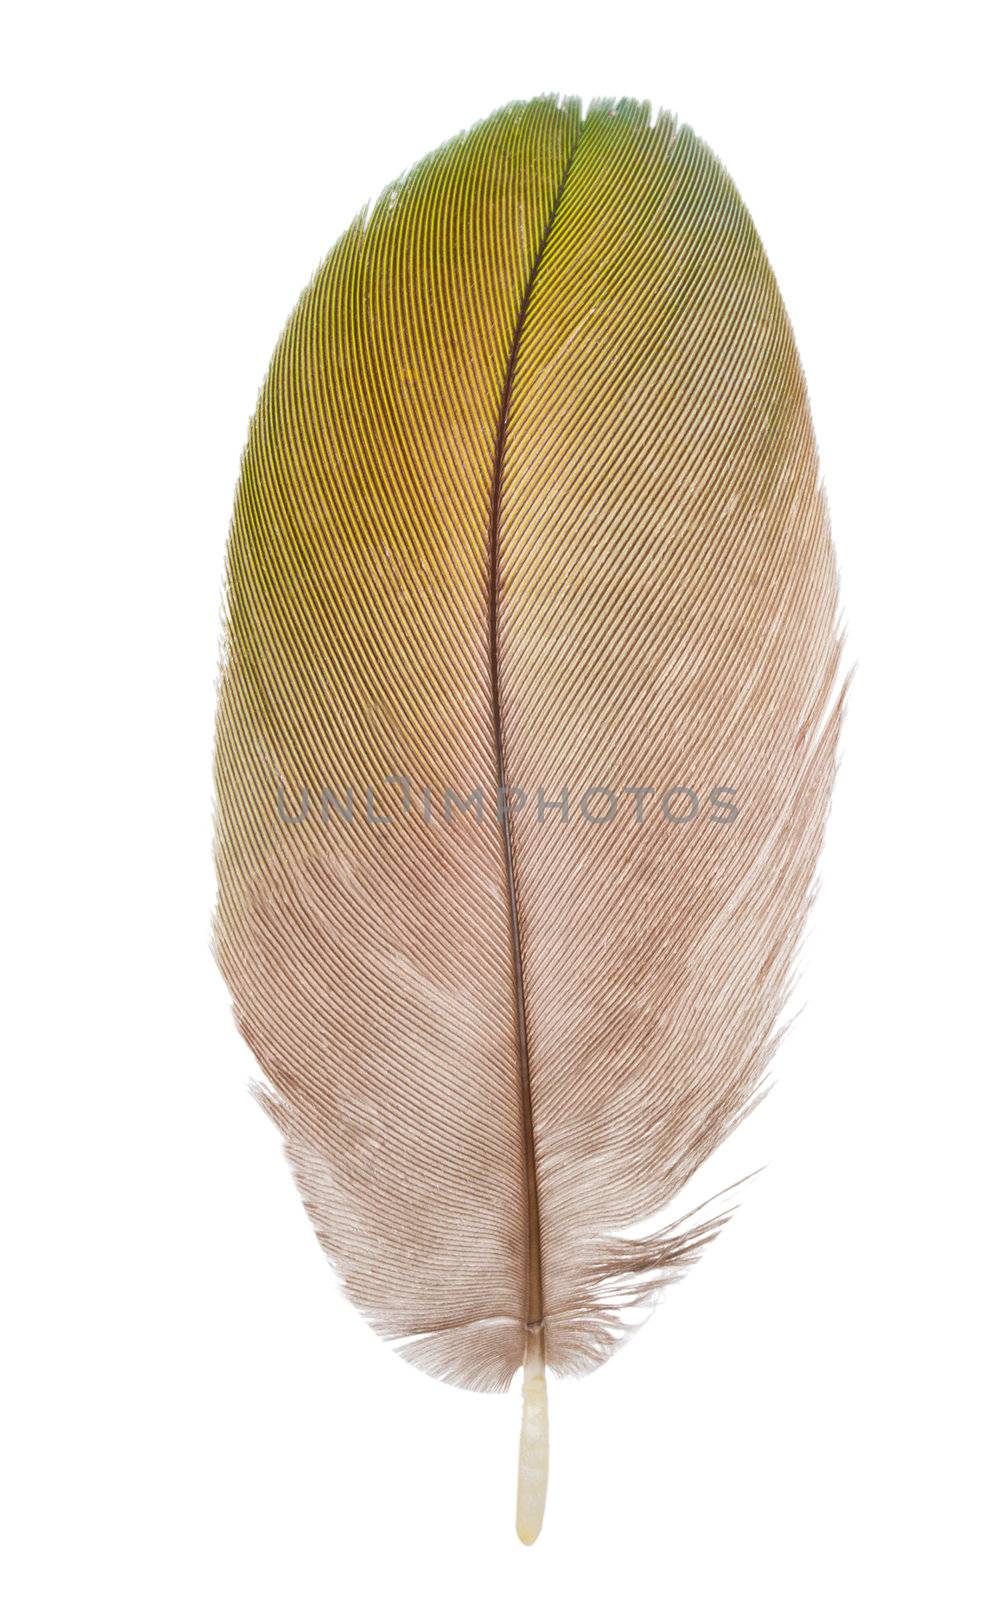 feather on white background by Alekcey